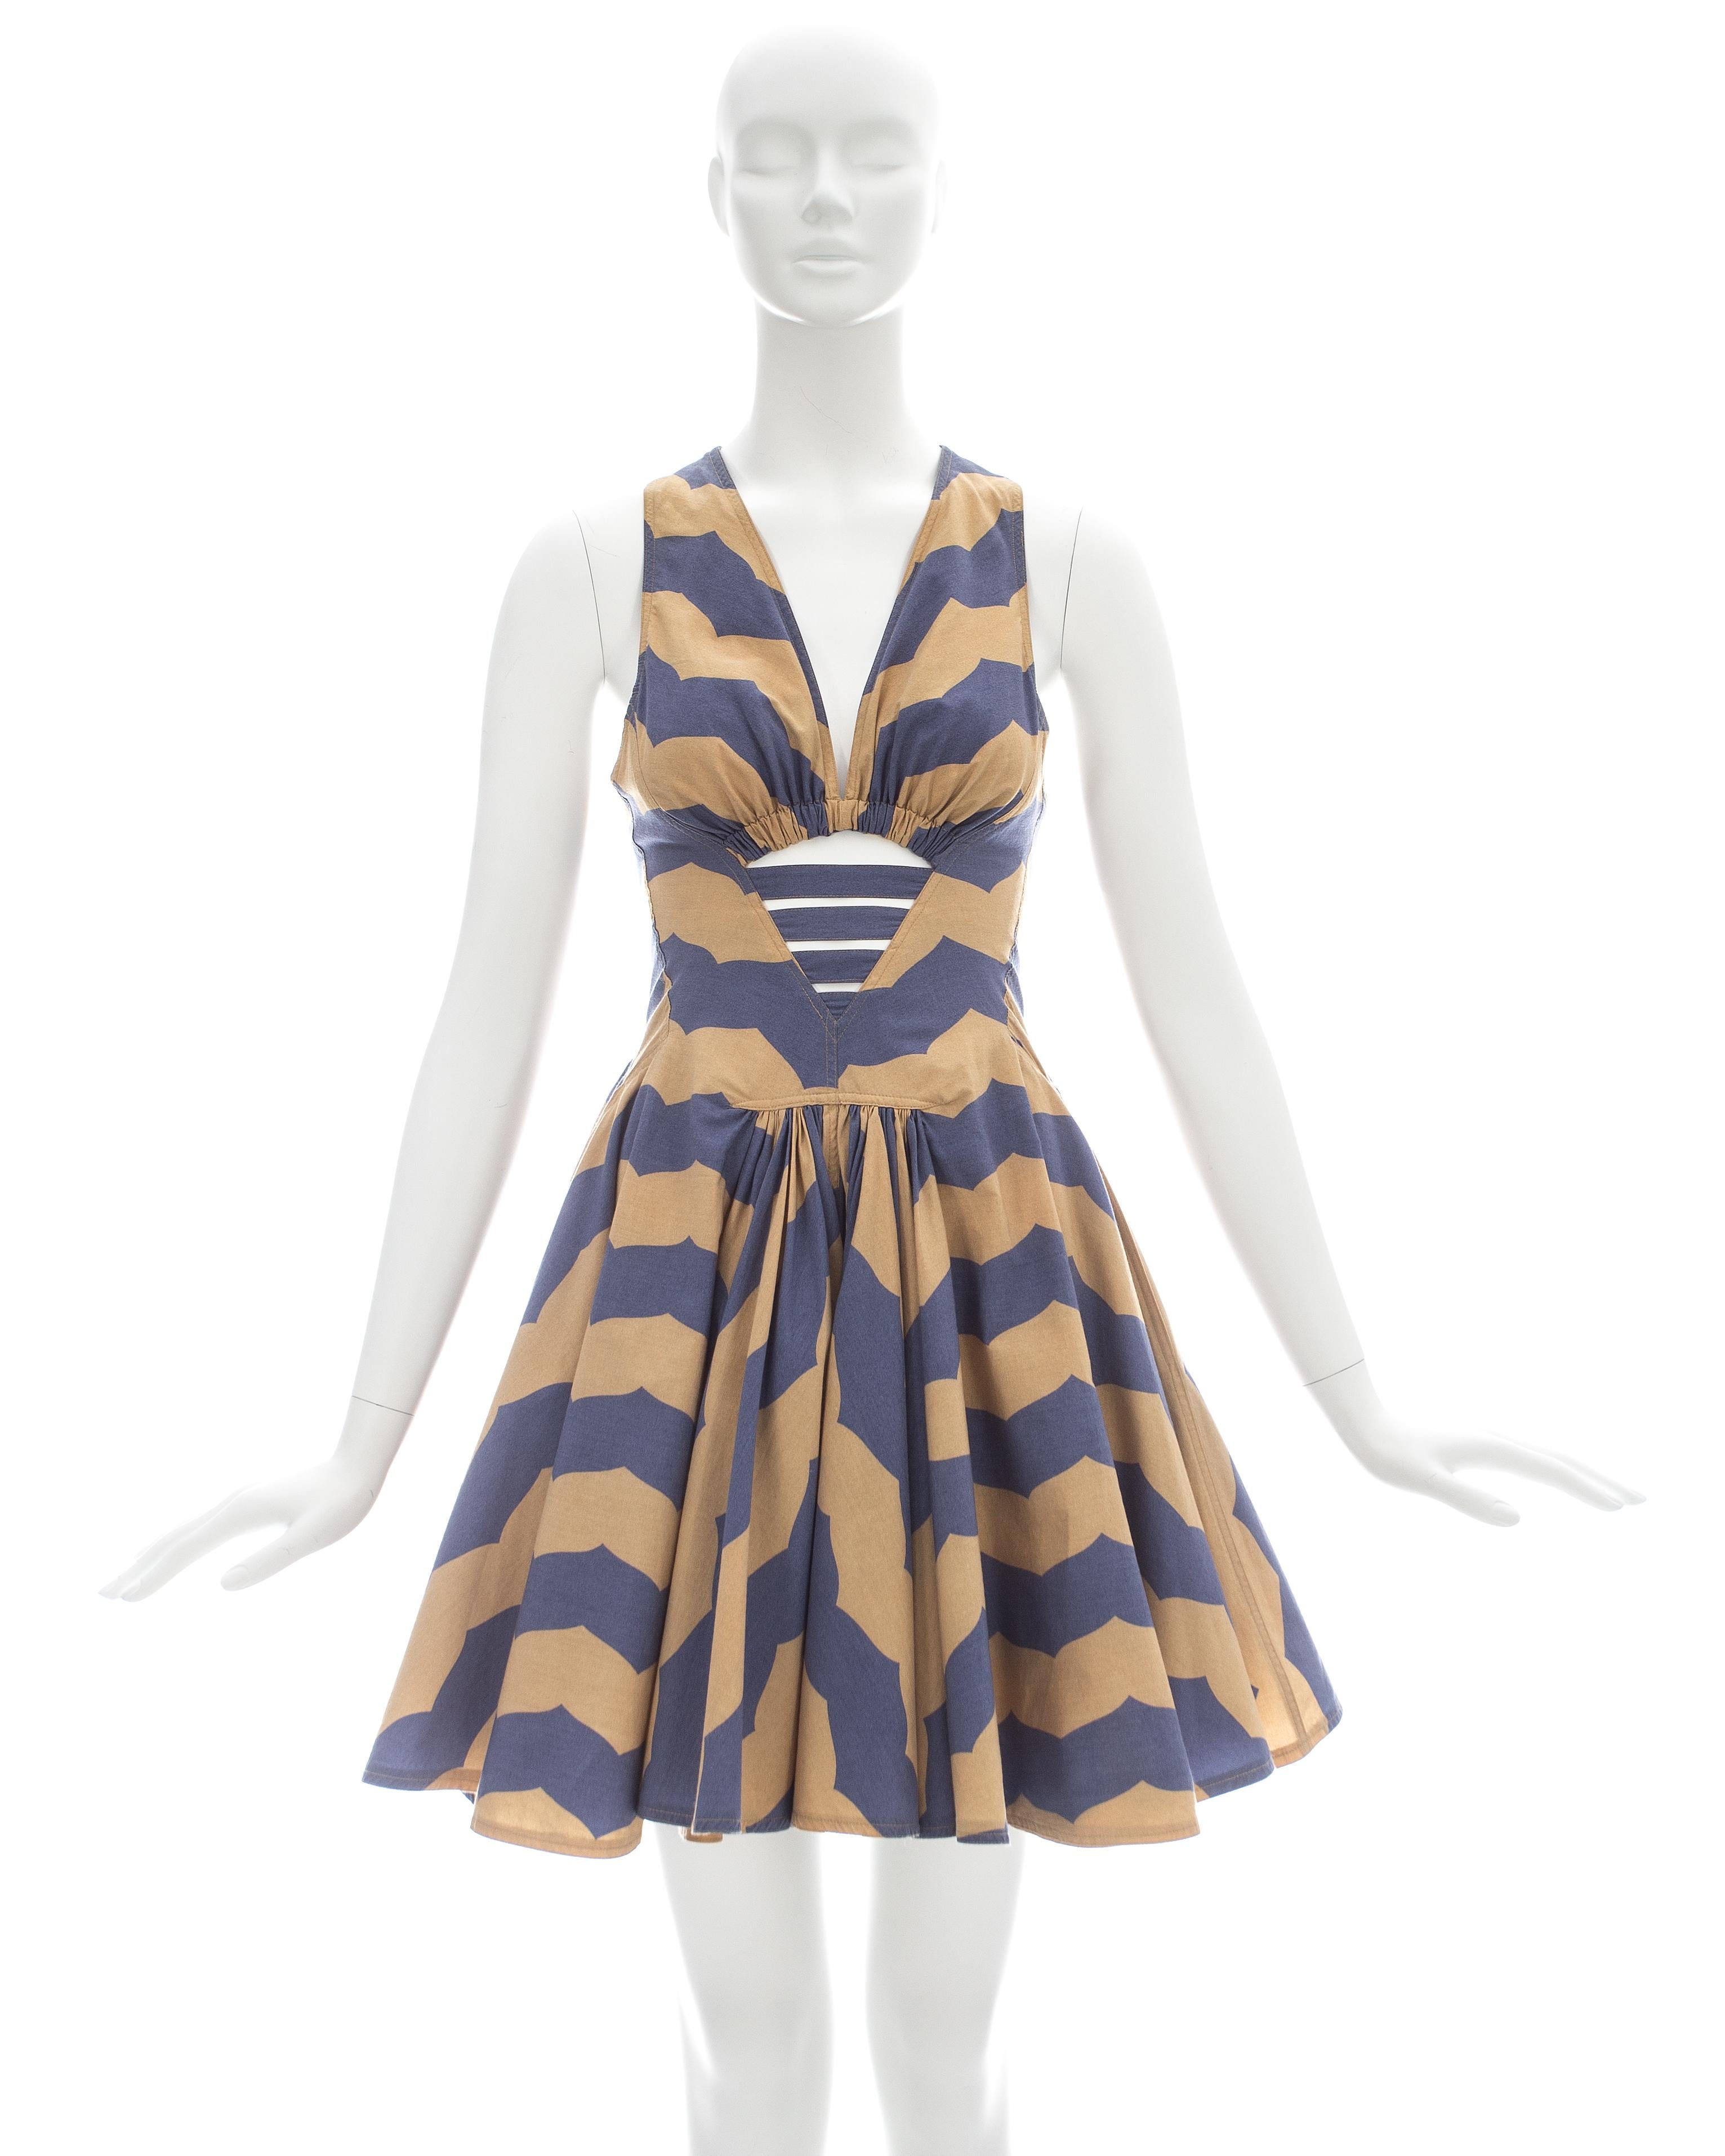 Azzedine Alaia; Cotton mini sundress in mauve and tan stripe print with caged cut-out, pleated skirt, and two hidden side pockets  

Spring-Summer 1990